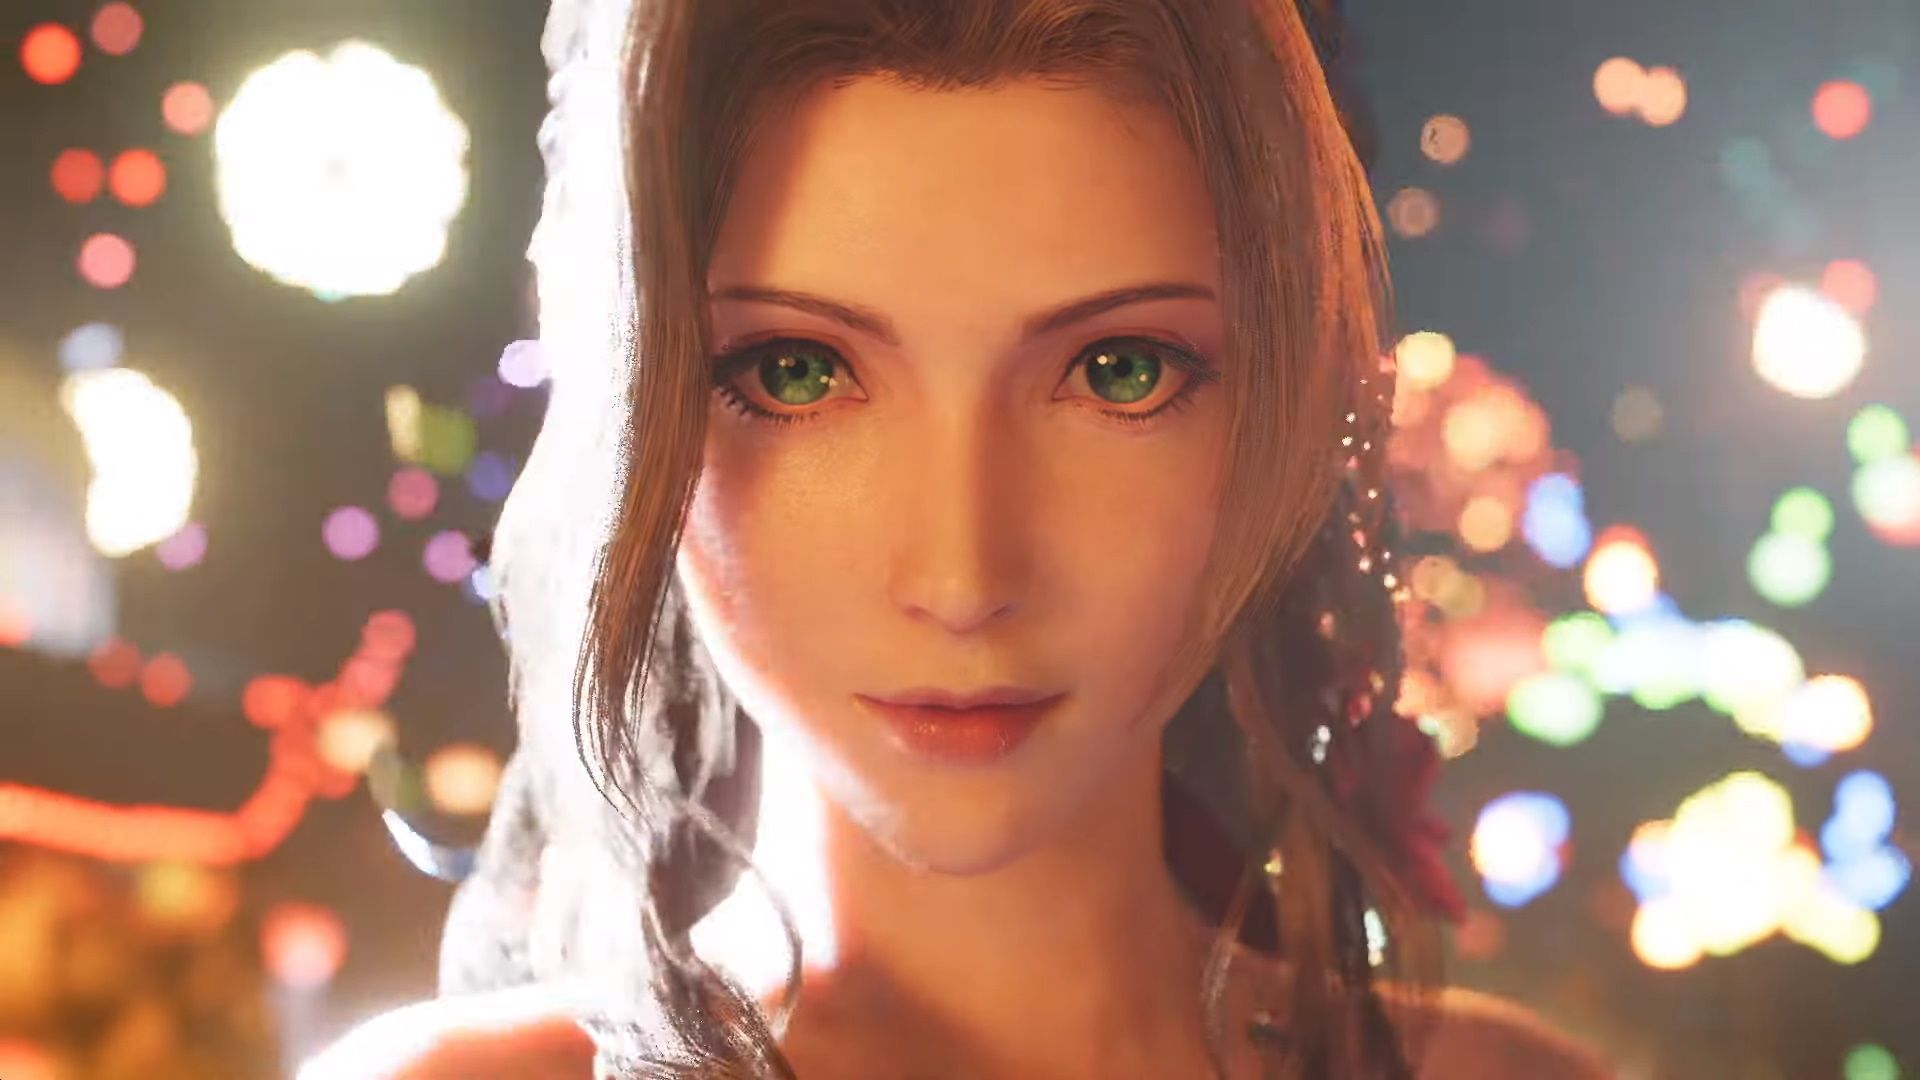 Aerith Final Fantasy 7 Remake Wallpapers Wallpaper Cave